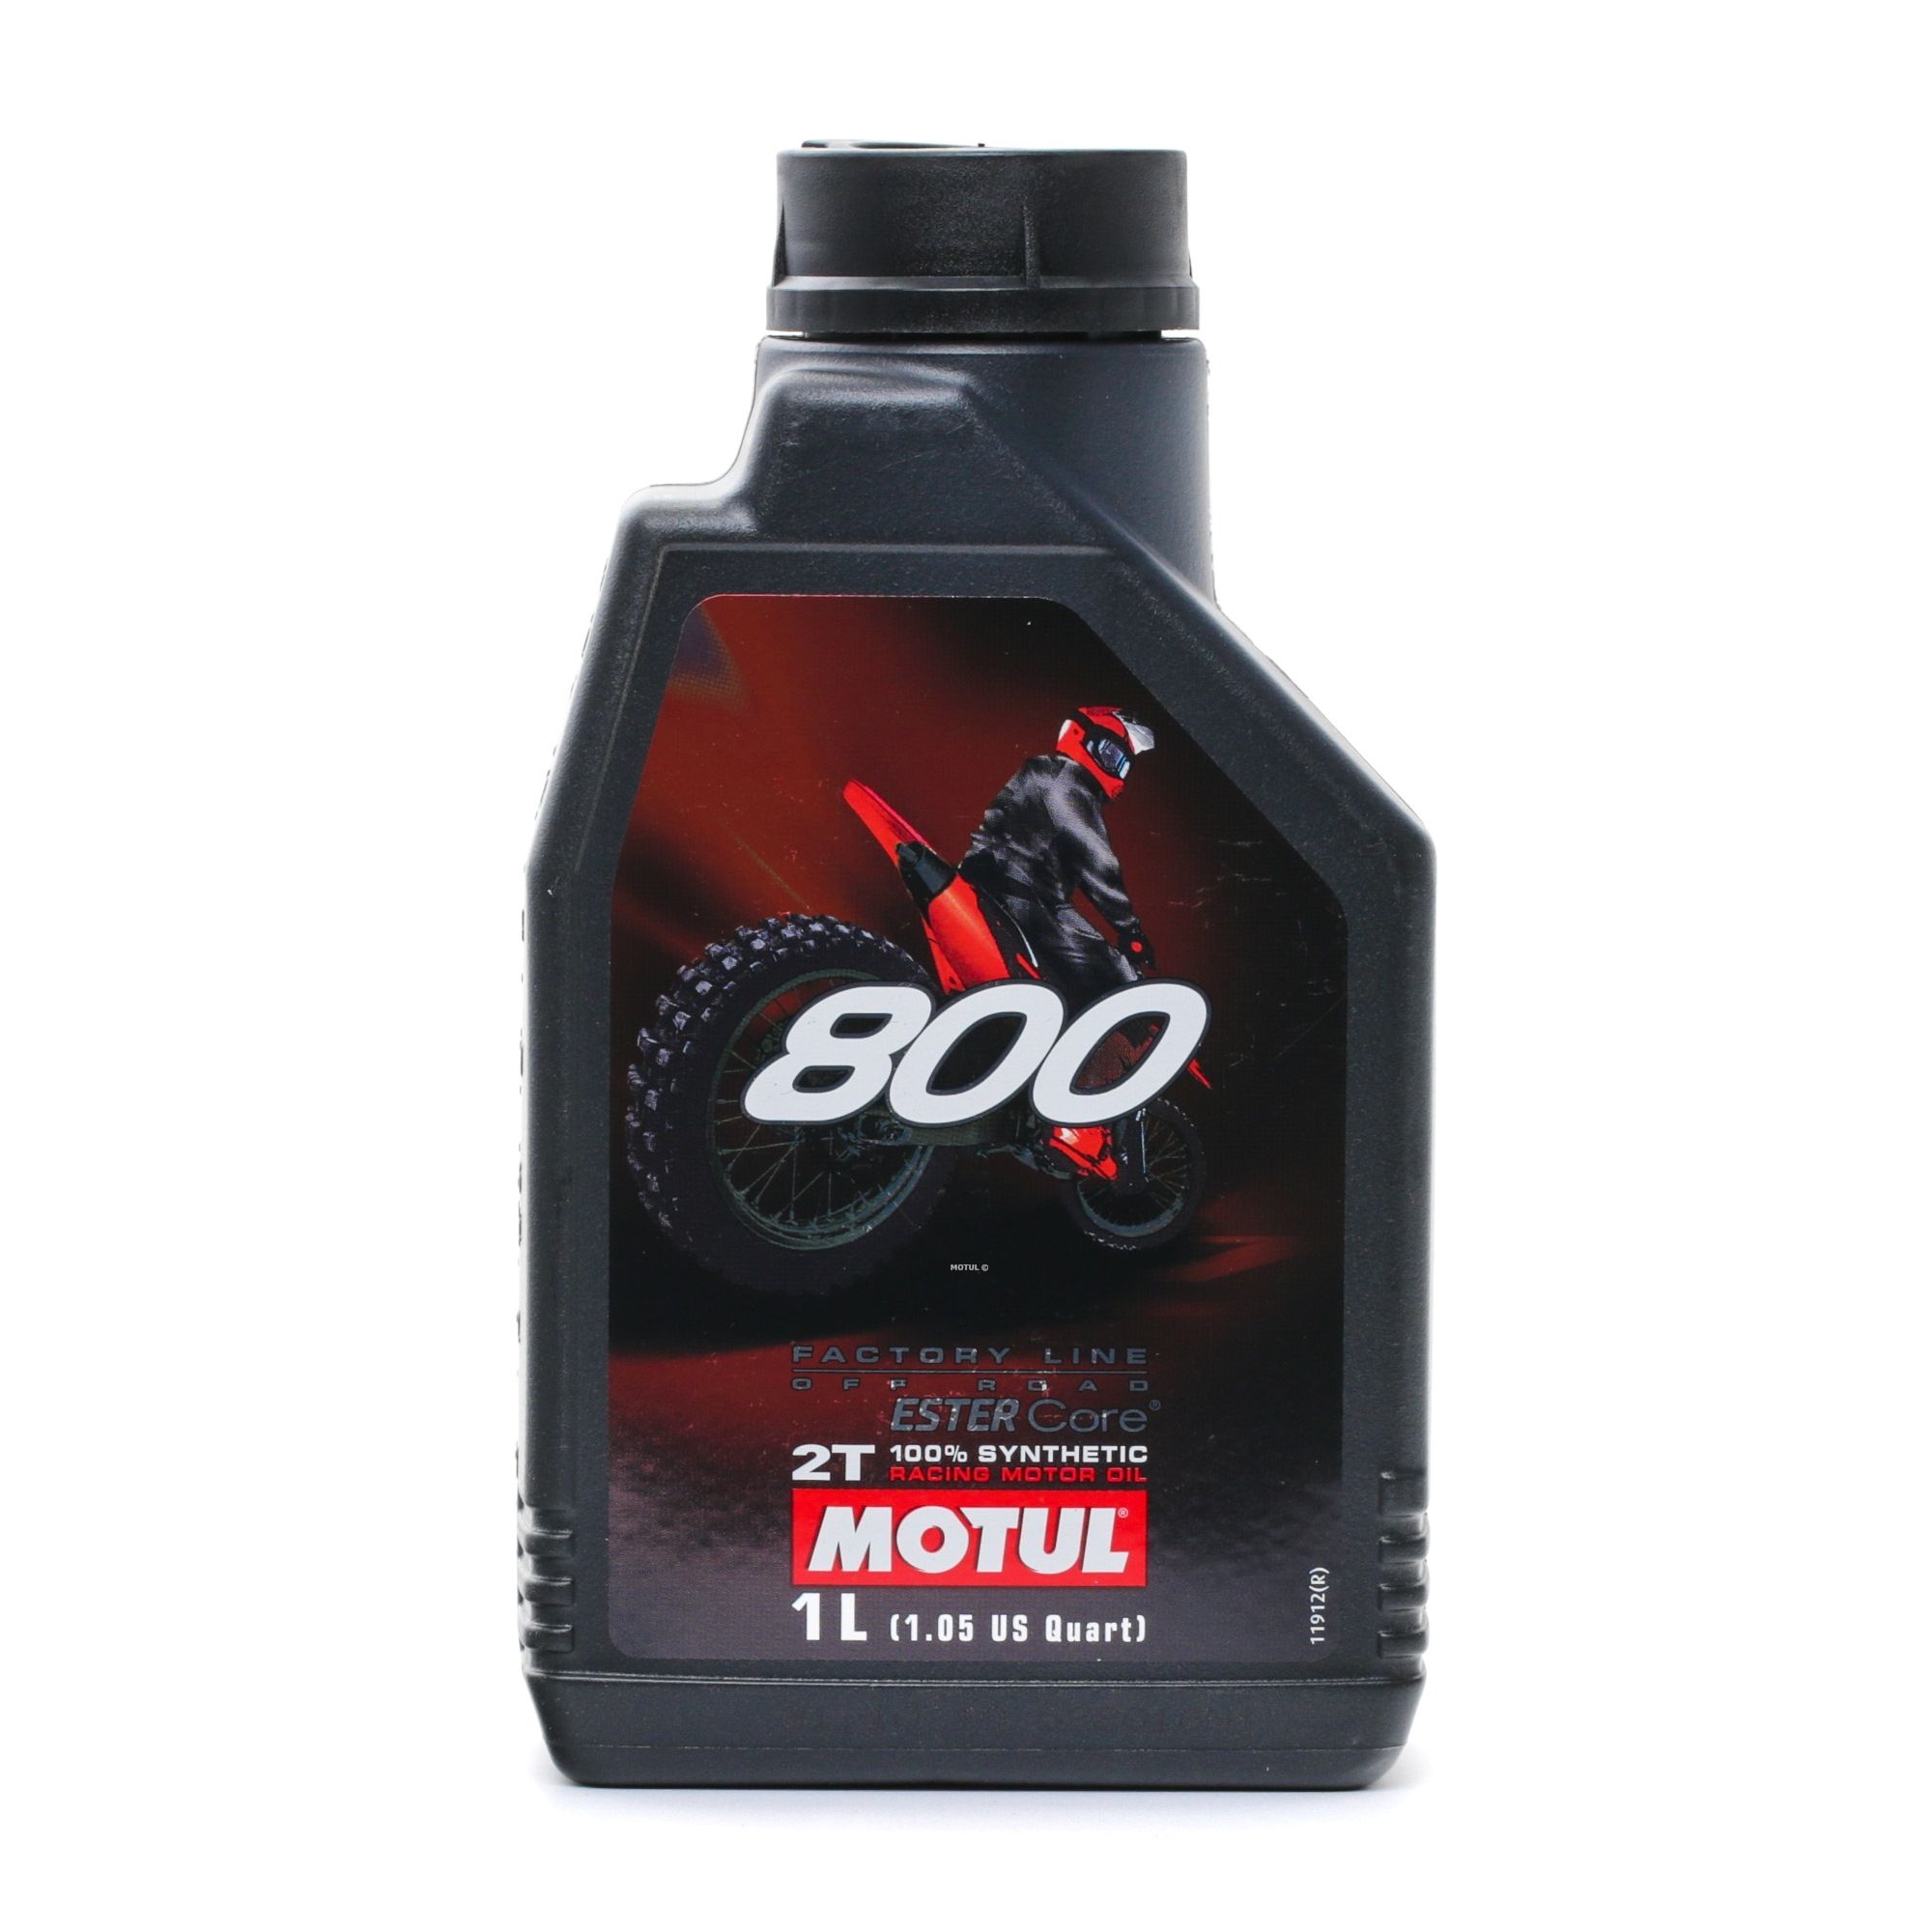 Maxi scooters Moped bike Motorcycle Engine Oil 104038